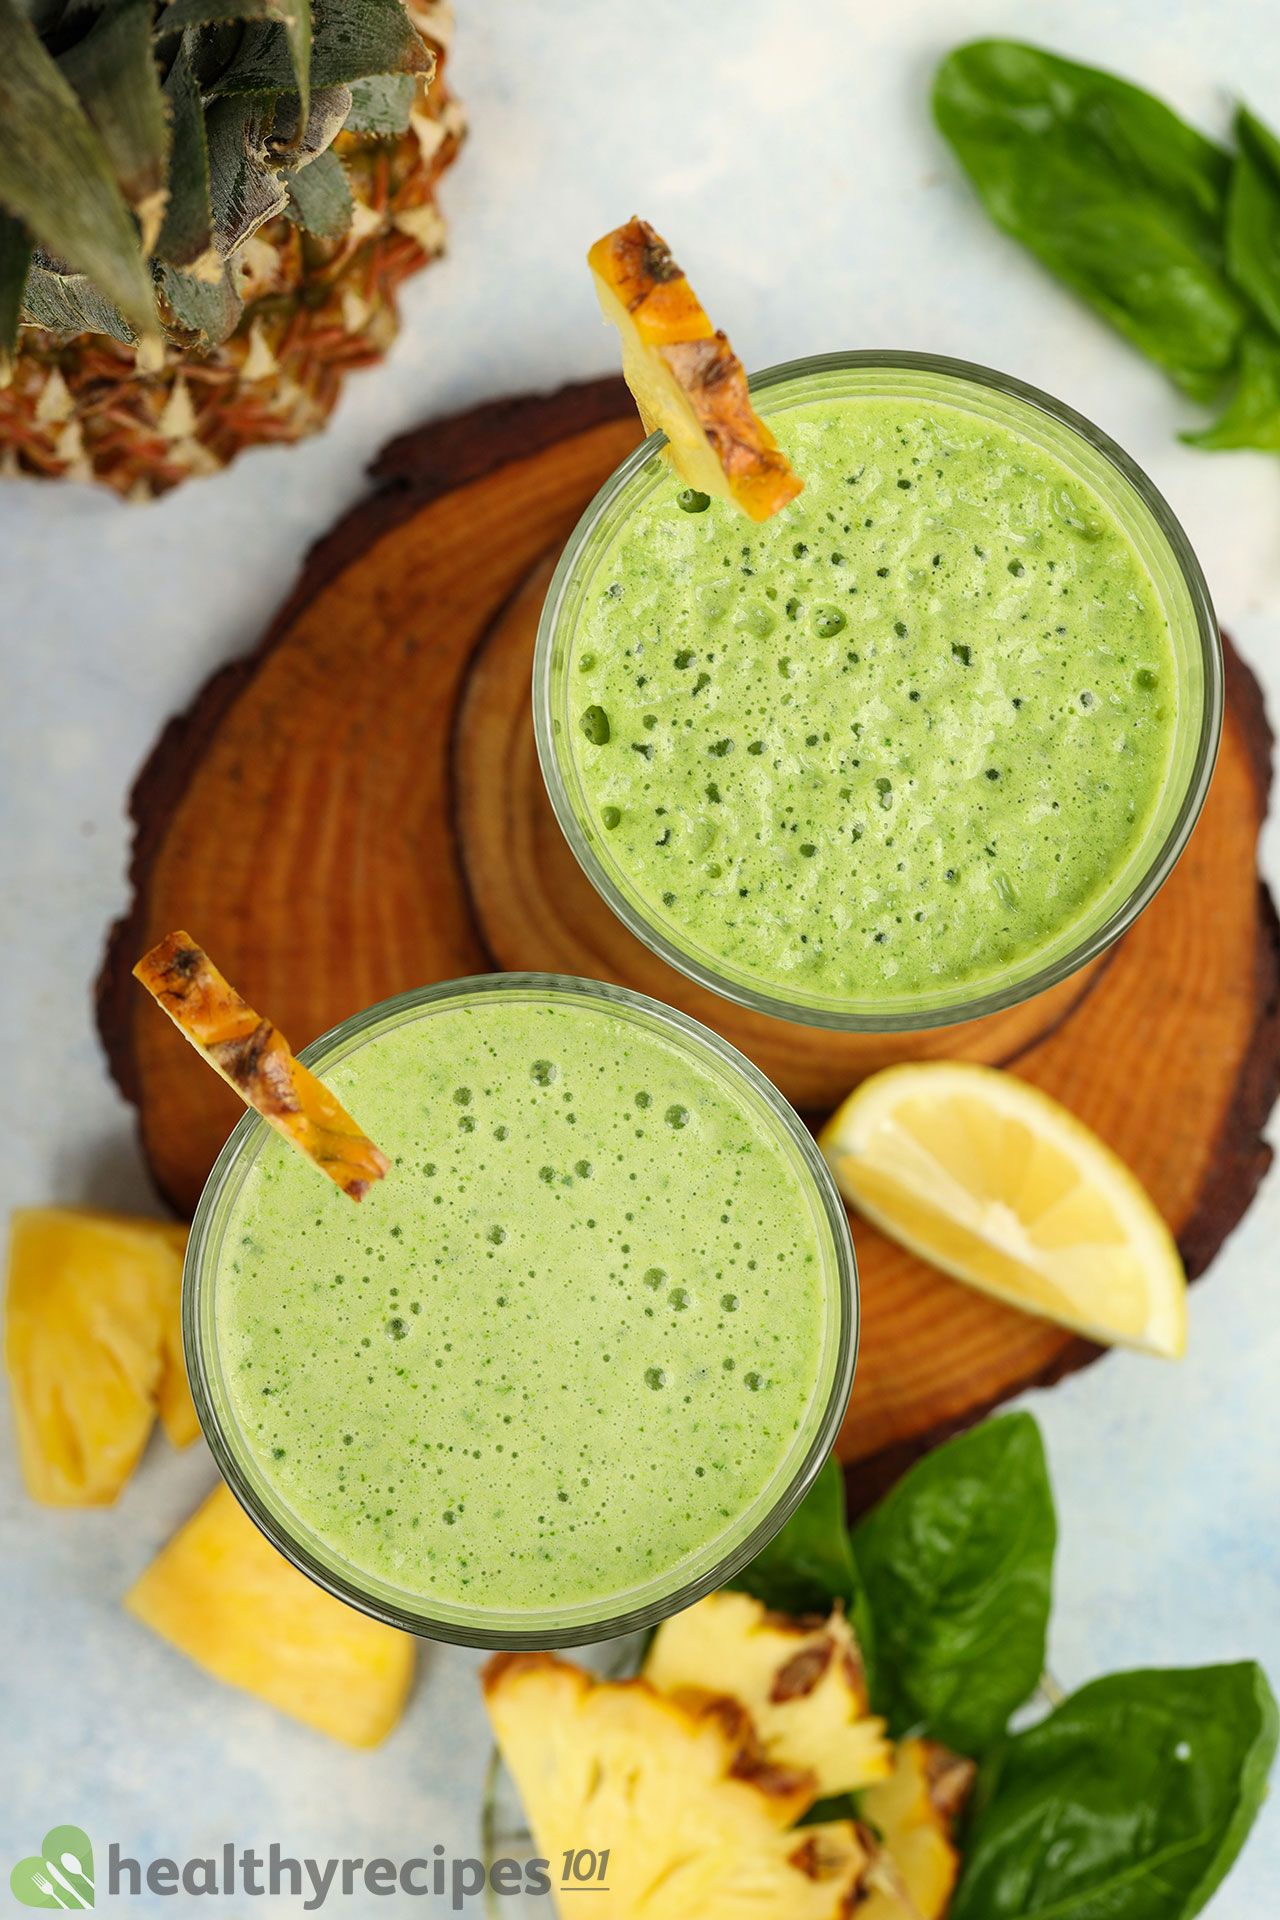 What Is the Best Time to Drink Green Smoothies